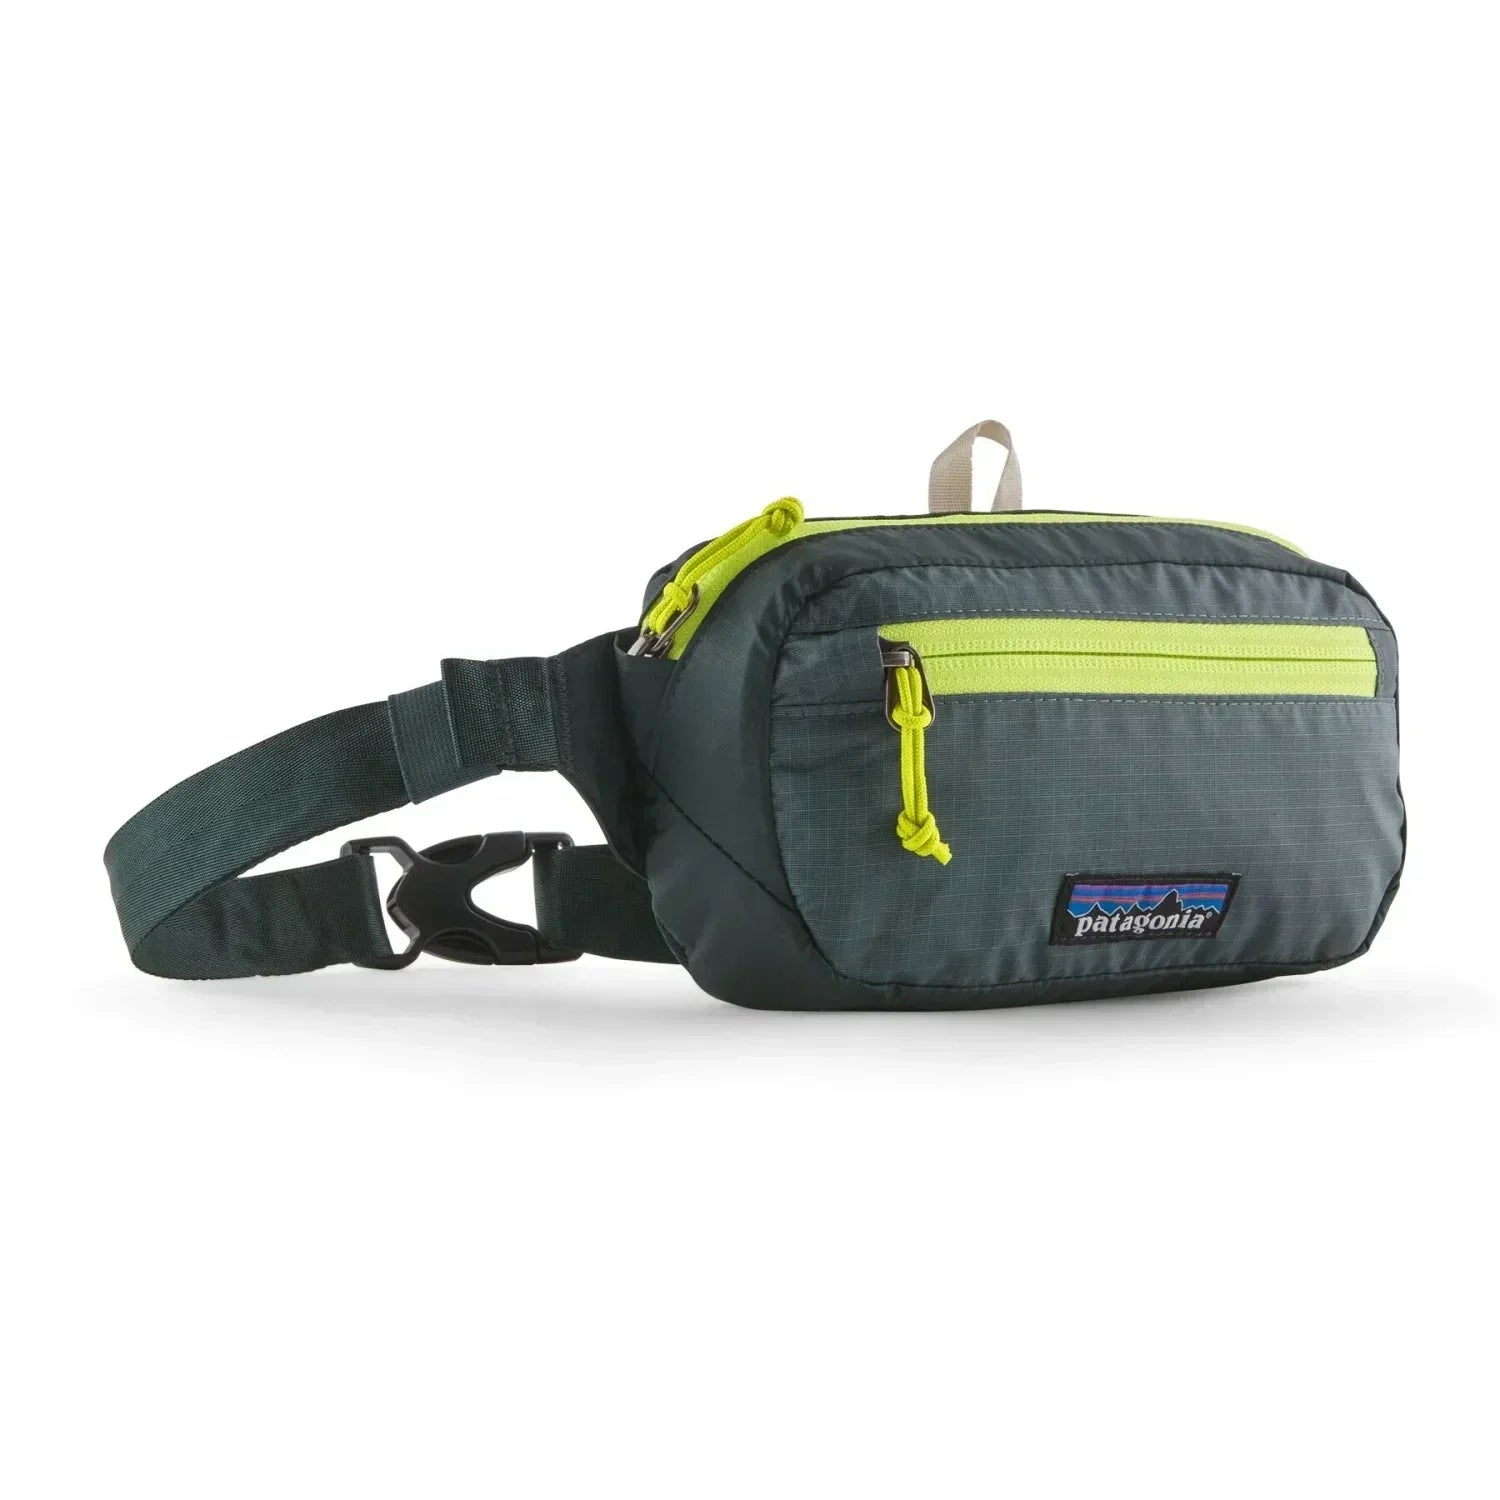 Patagonia 09. PACKS|LUGGAGE - PACK|CASUAL - WAIST|SLING|MESSENGER|PURSE Ultralight Black Hole Mini Hip Pack 1L NUVG NOUVEAU GREEN